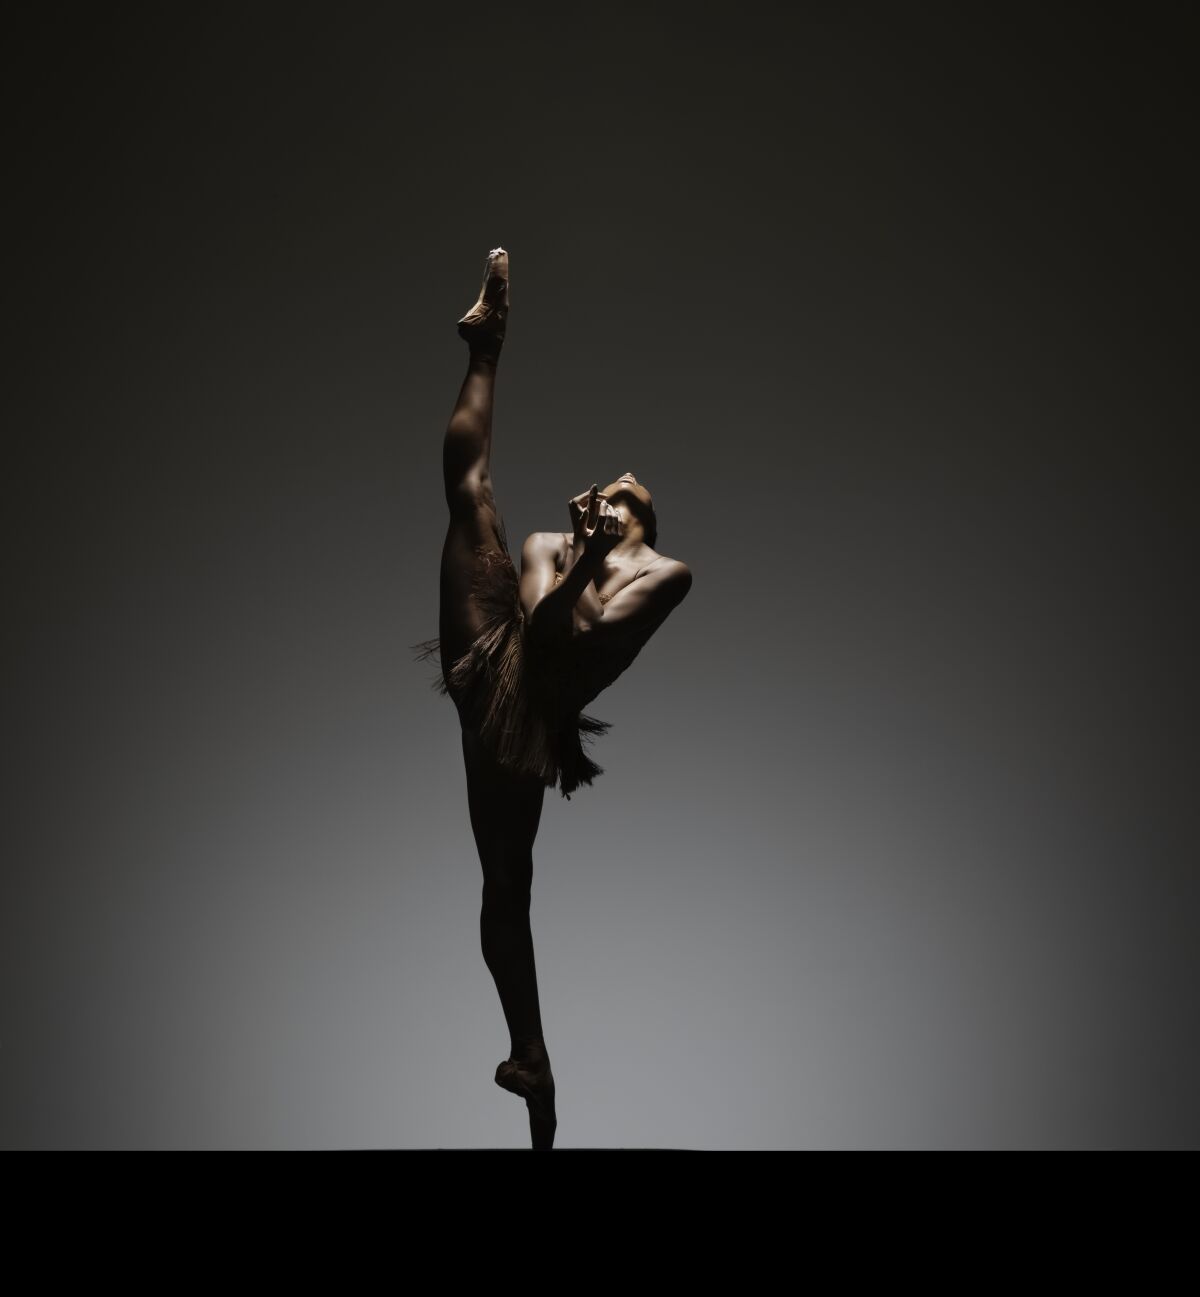 A dancer standing on pointe with one leg extended in the air